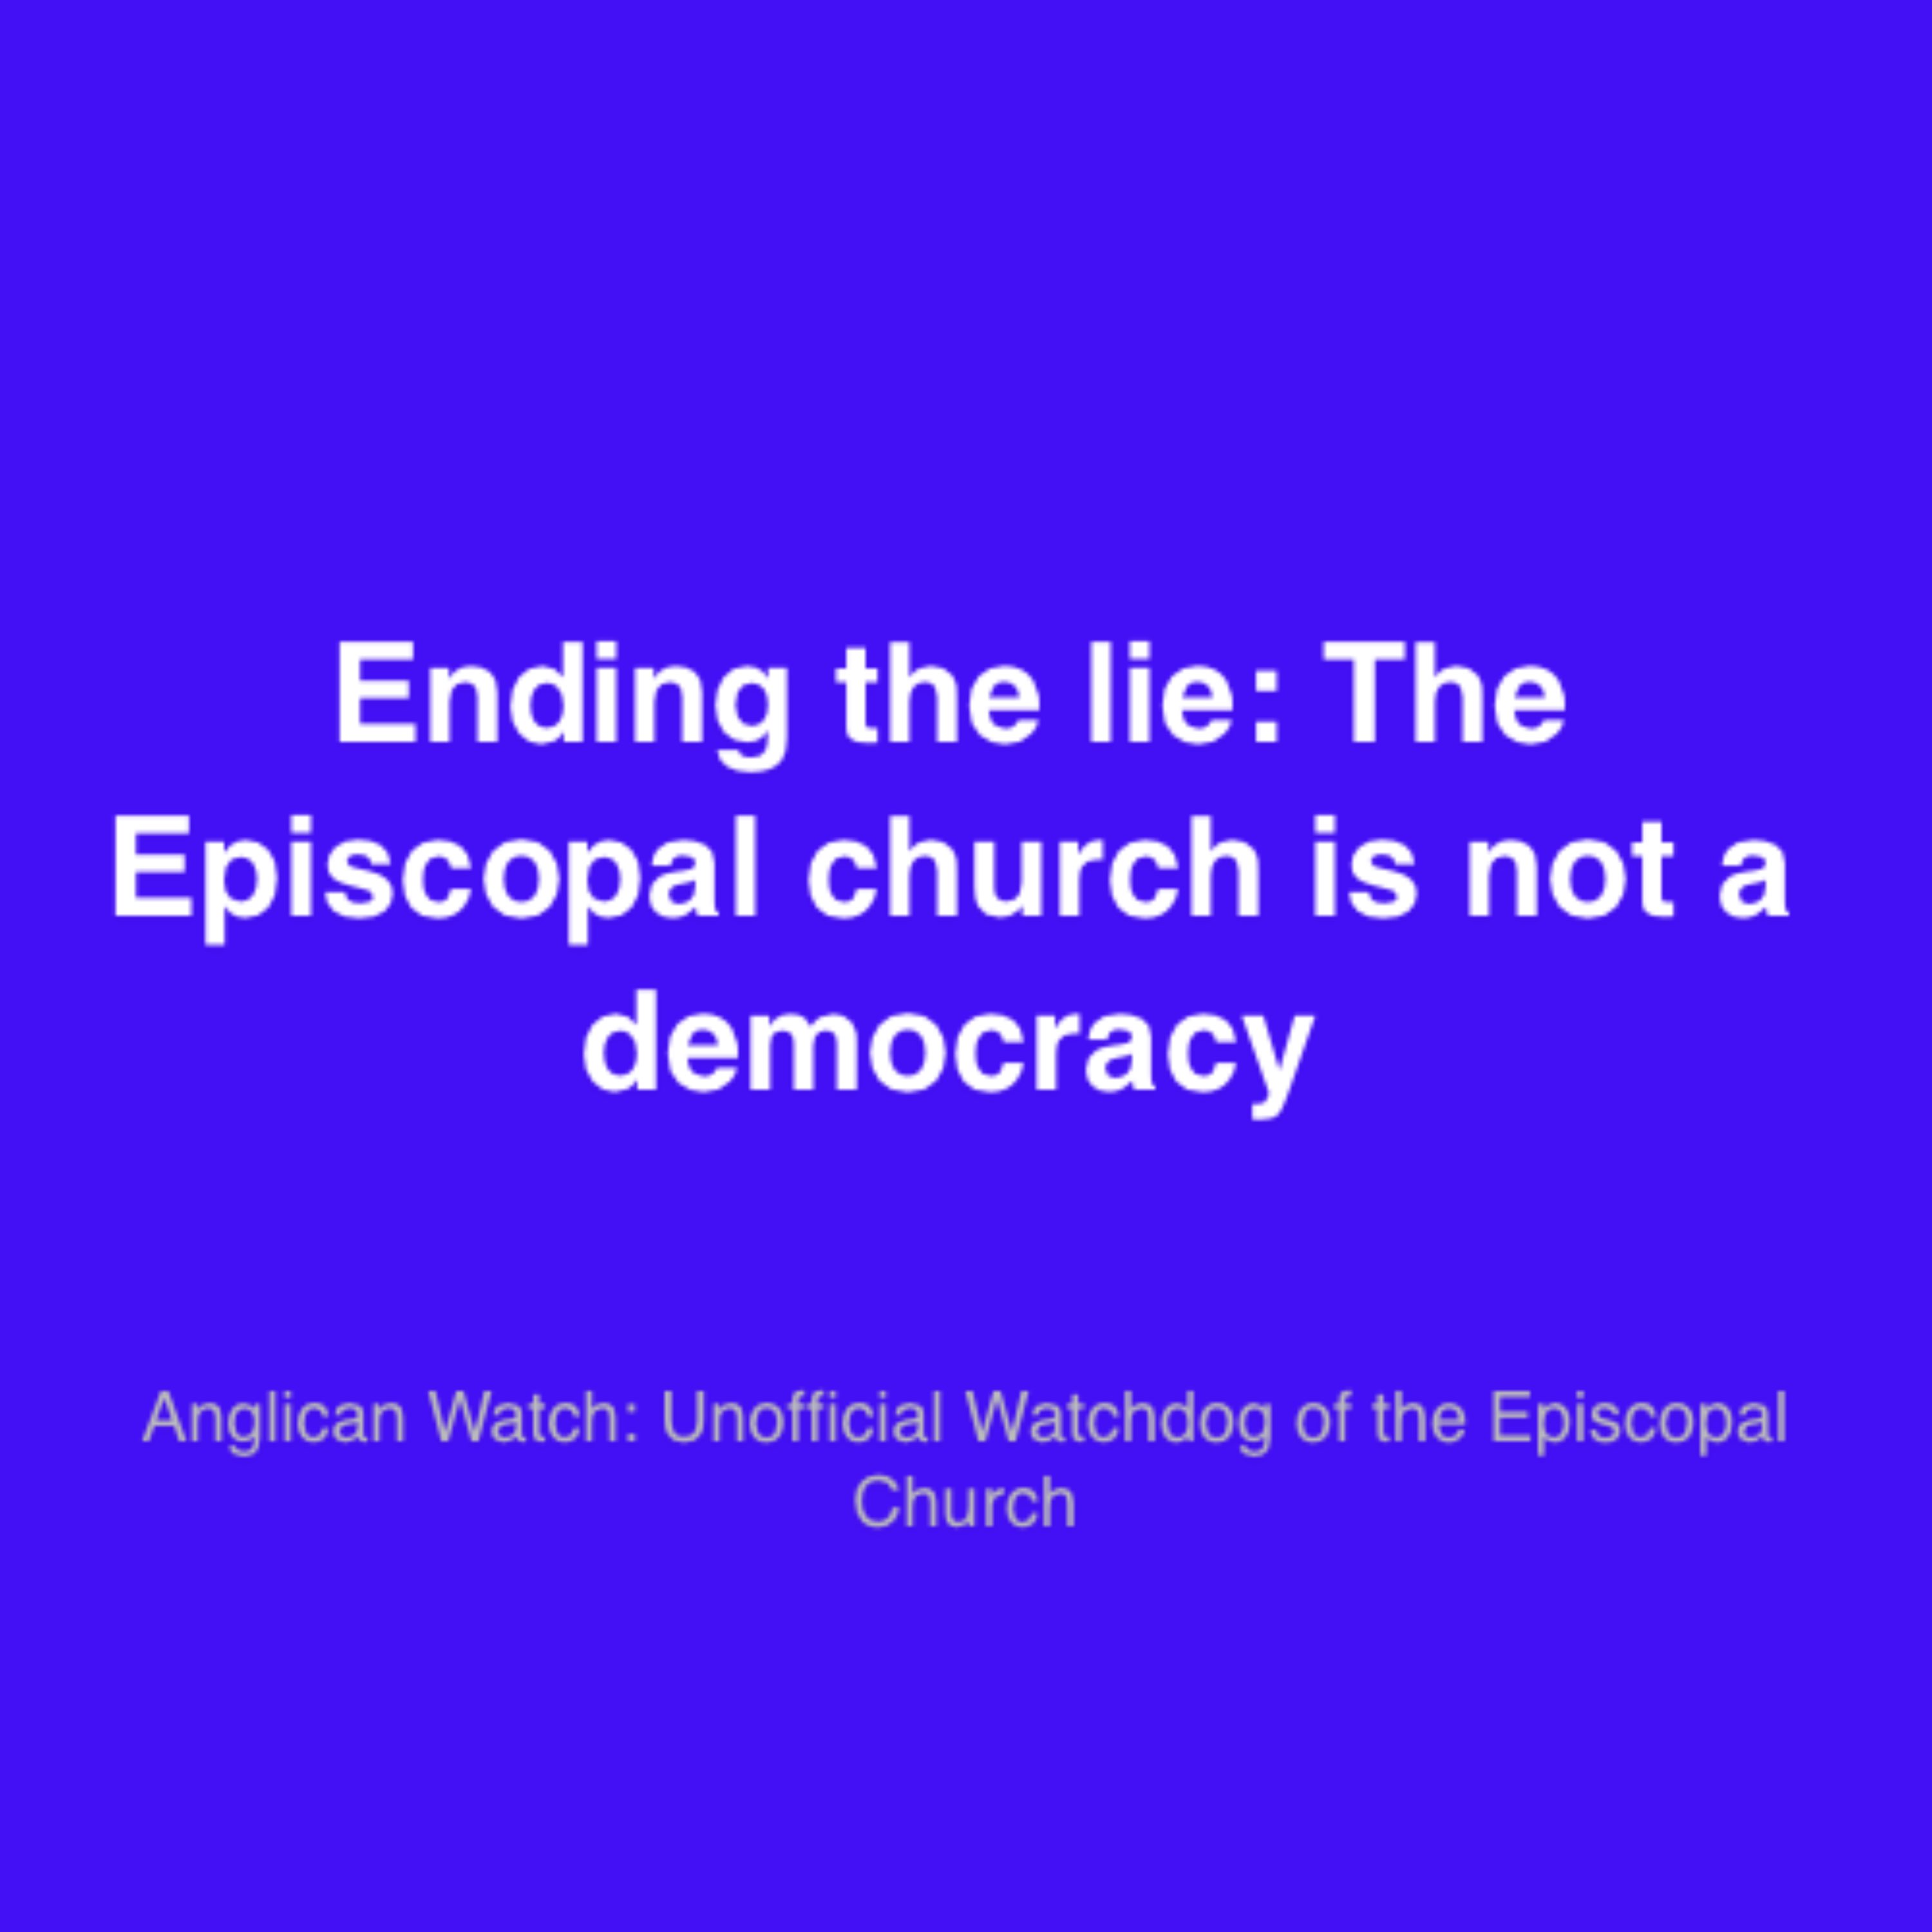 Ending the lie: The Episcopal church is not a democracy